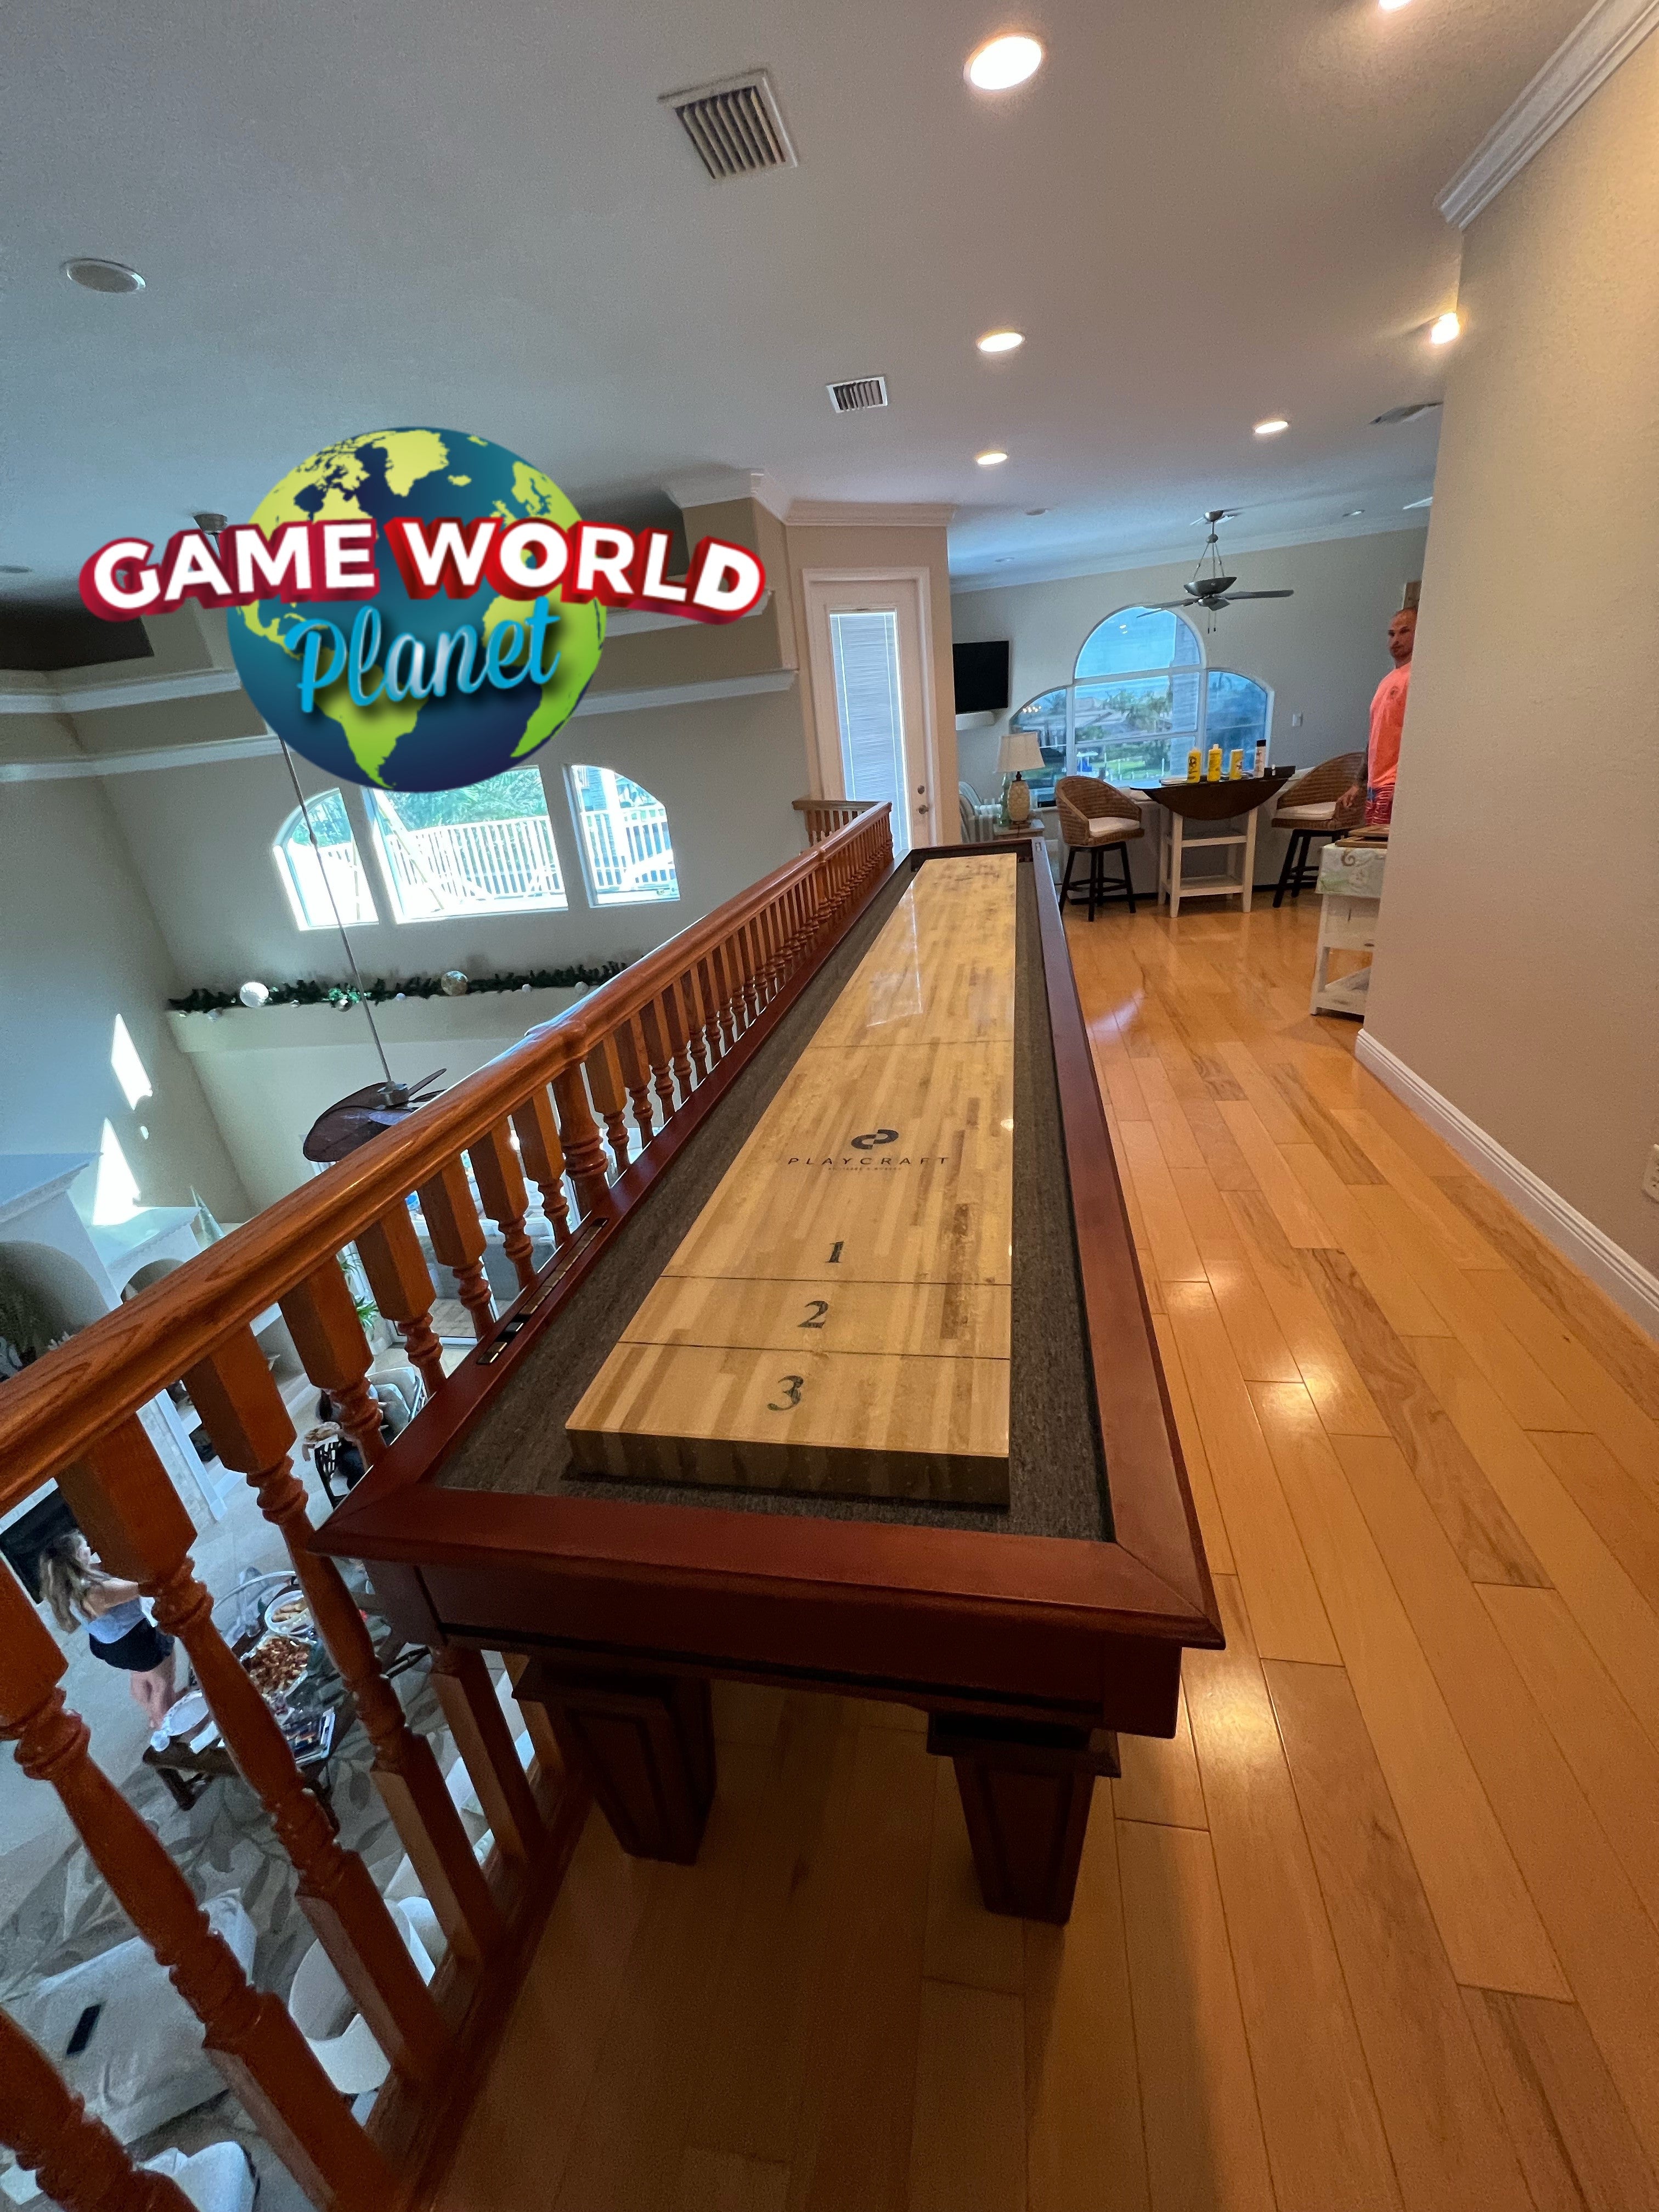 Playcraft St. Lawrence 12'  Pro-Style Shuffleboard Table in Chestnut